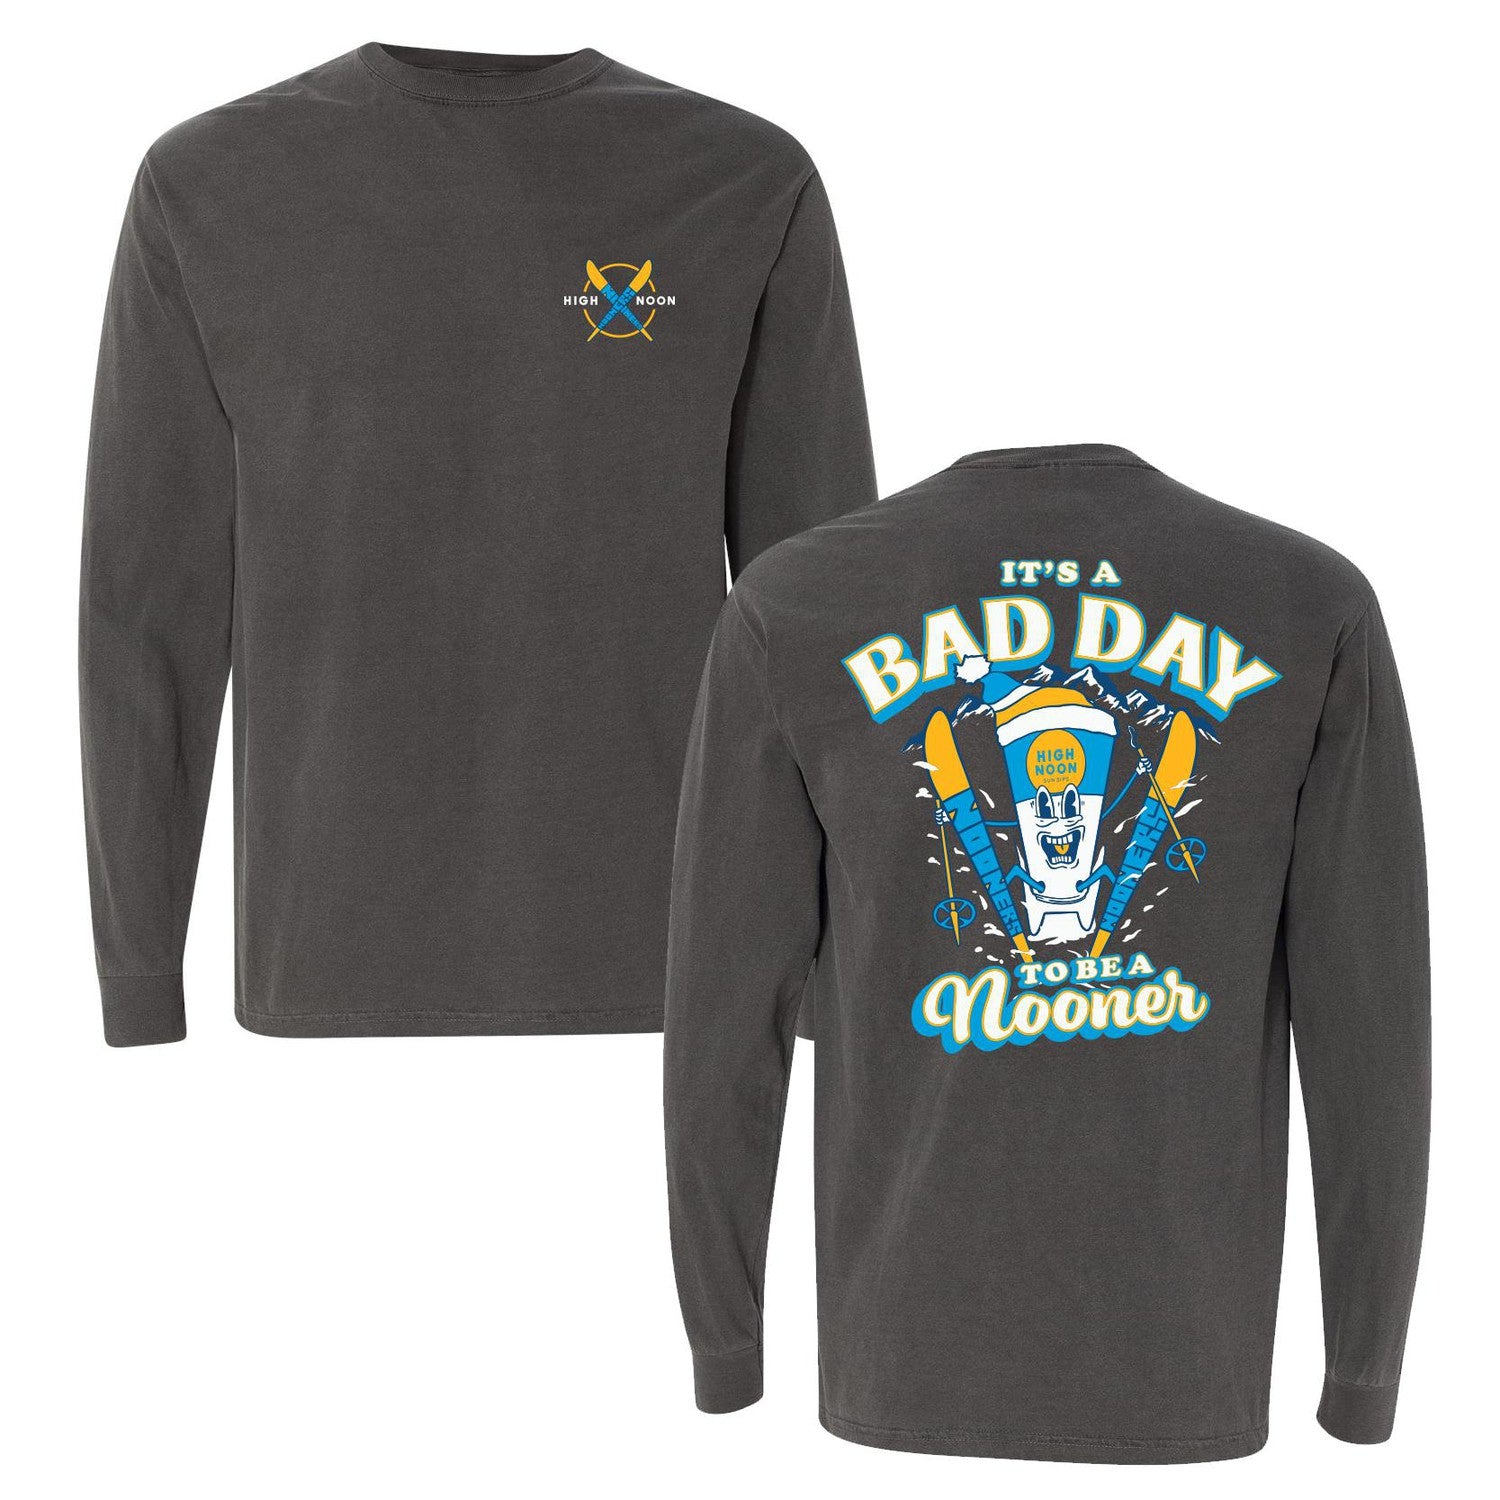 Bad Day To Be A Nooner Ski Club Long Sleeve Tee